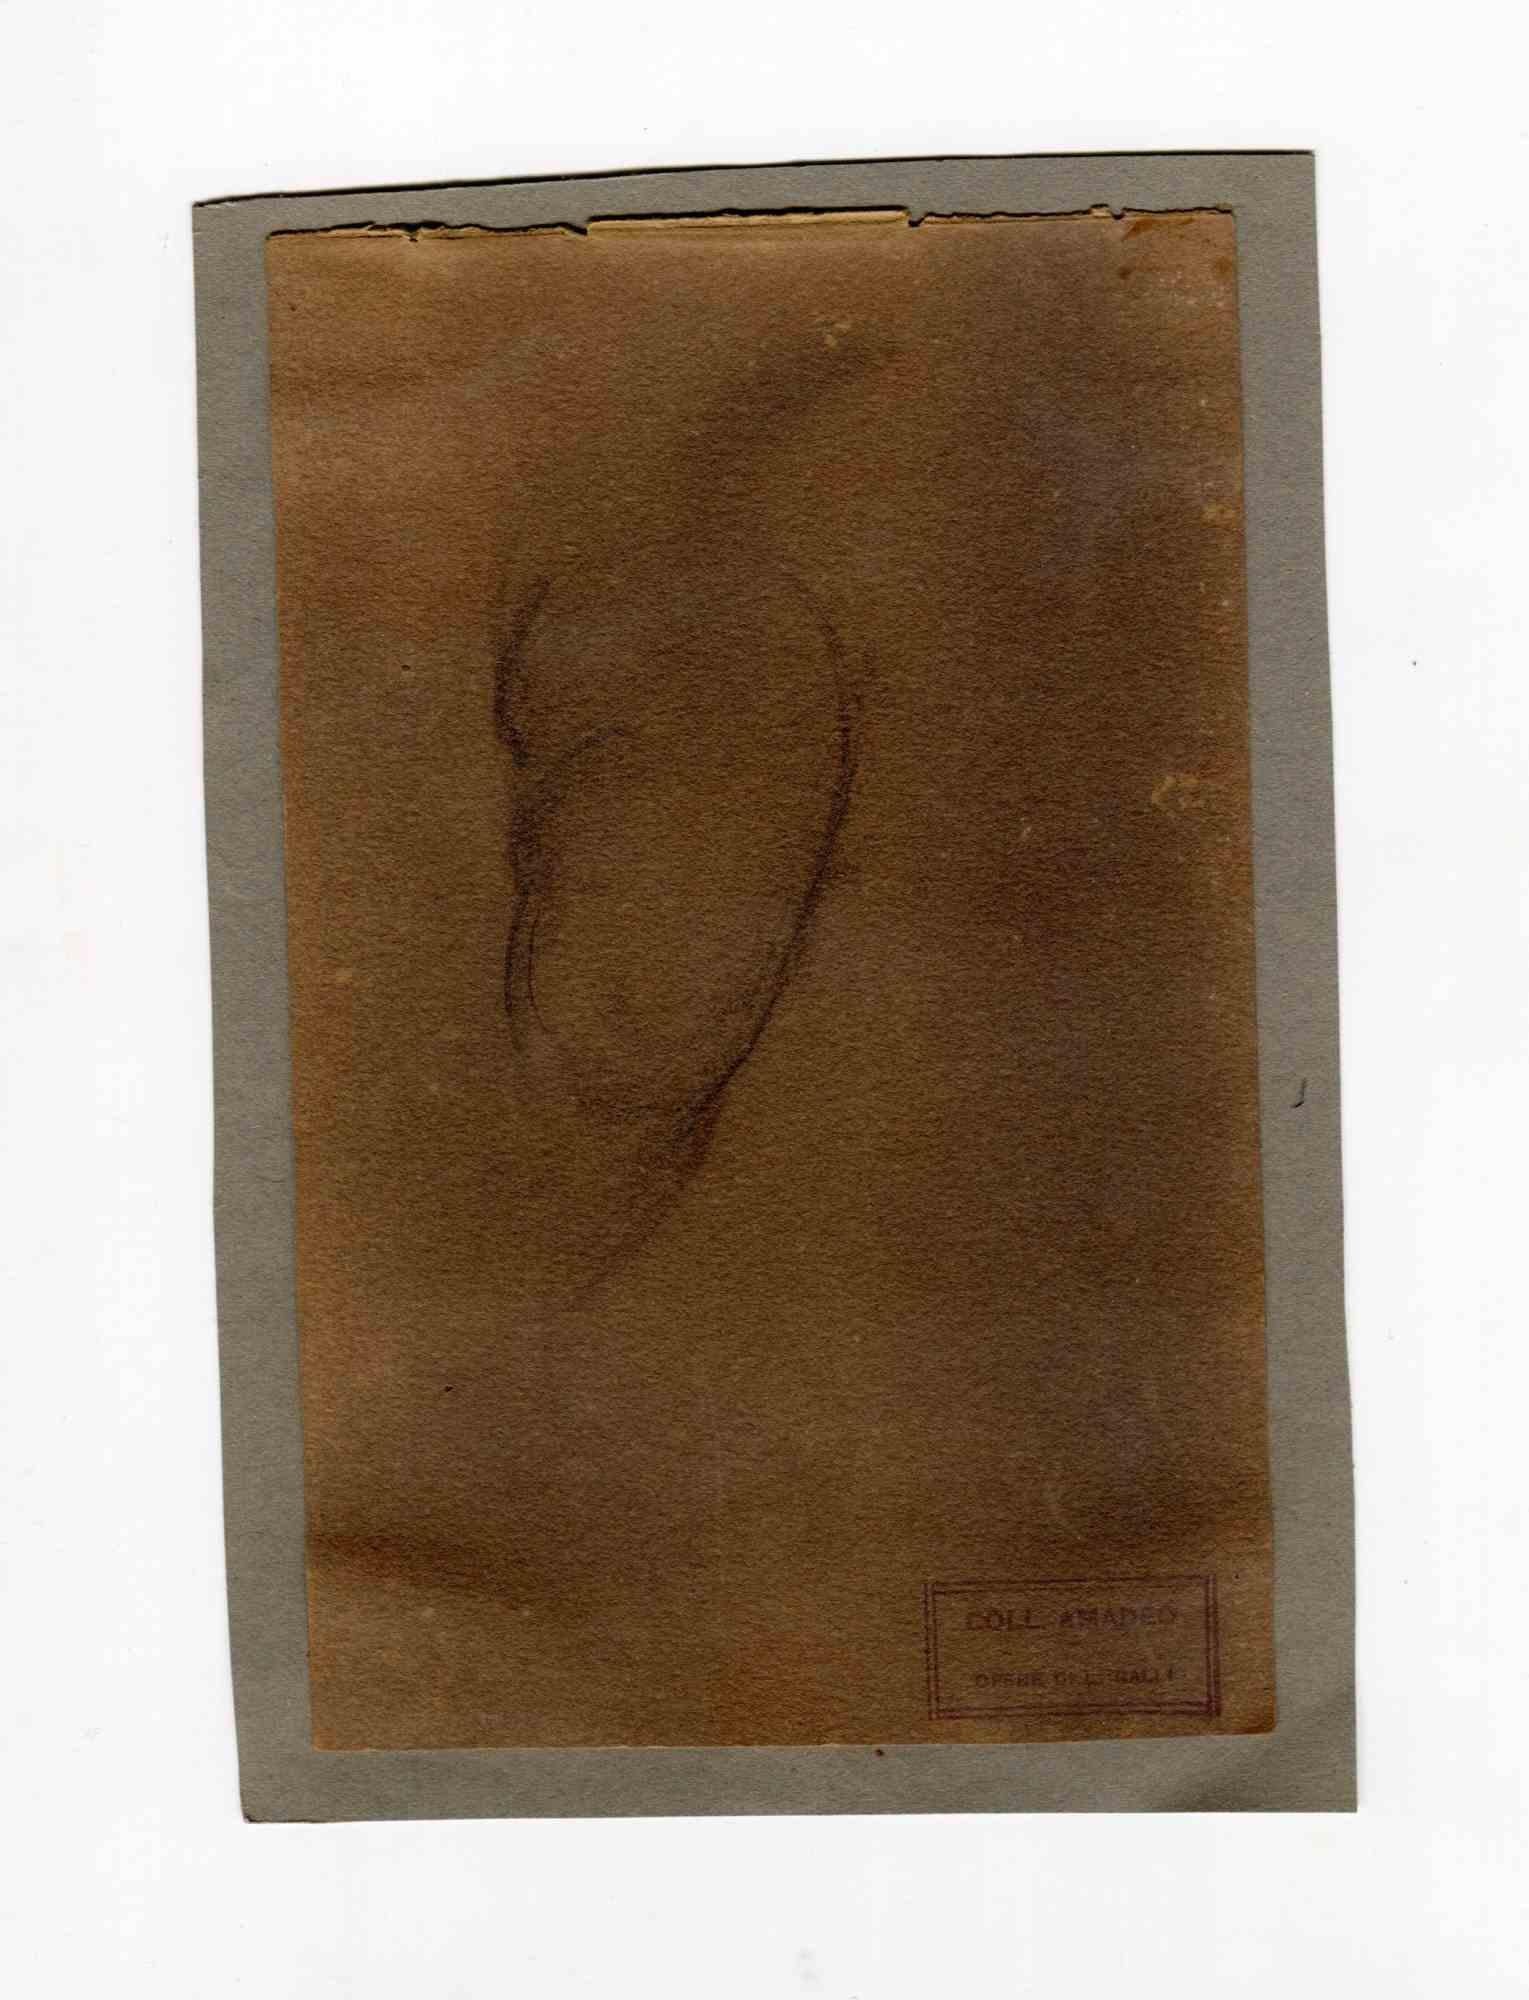 The Sketch is an original drawing realized by Luigi Galli in the Late 19th Century.

Stamped," Coll. Amadeo"

Good conditions but aged.

The artwork is depicted through soft strokes and perfect hatchings.